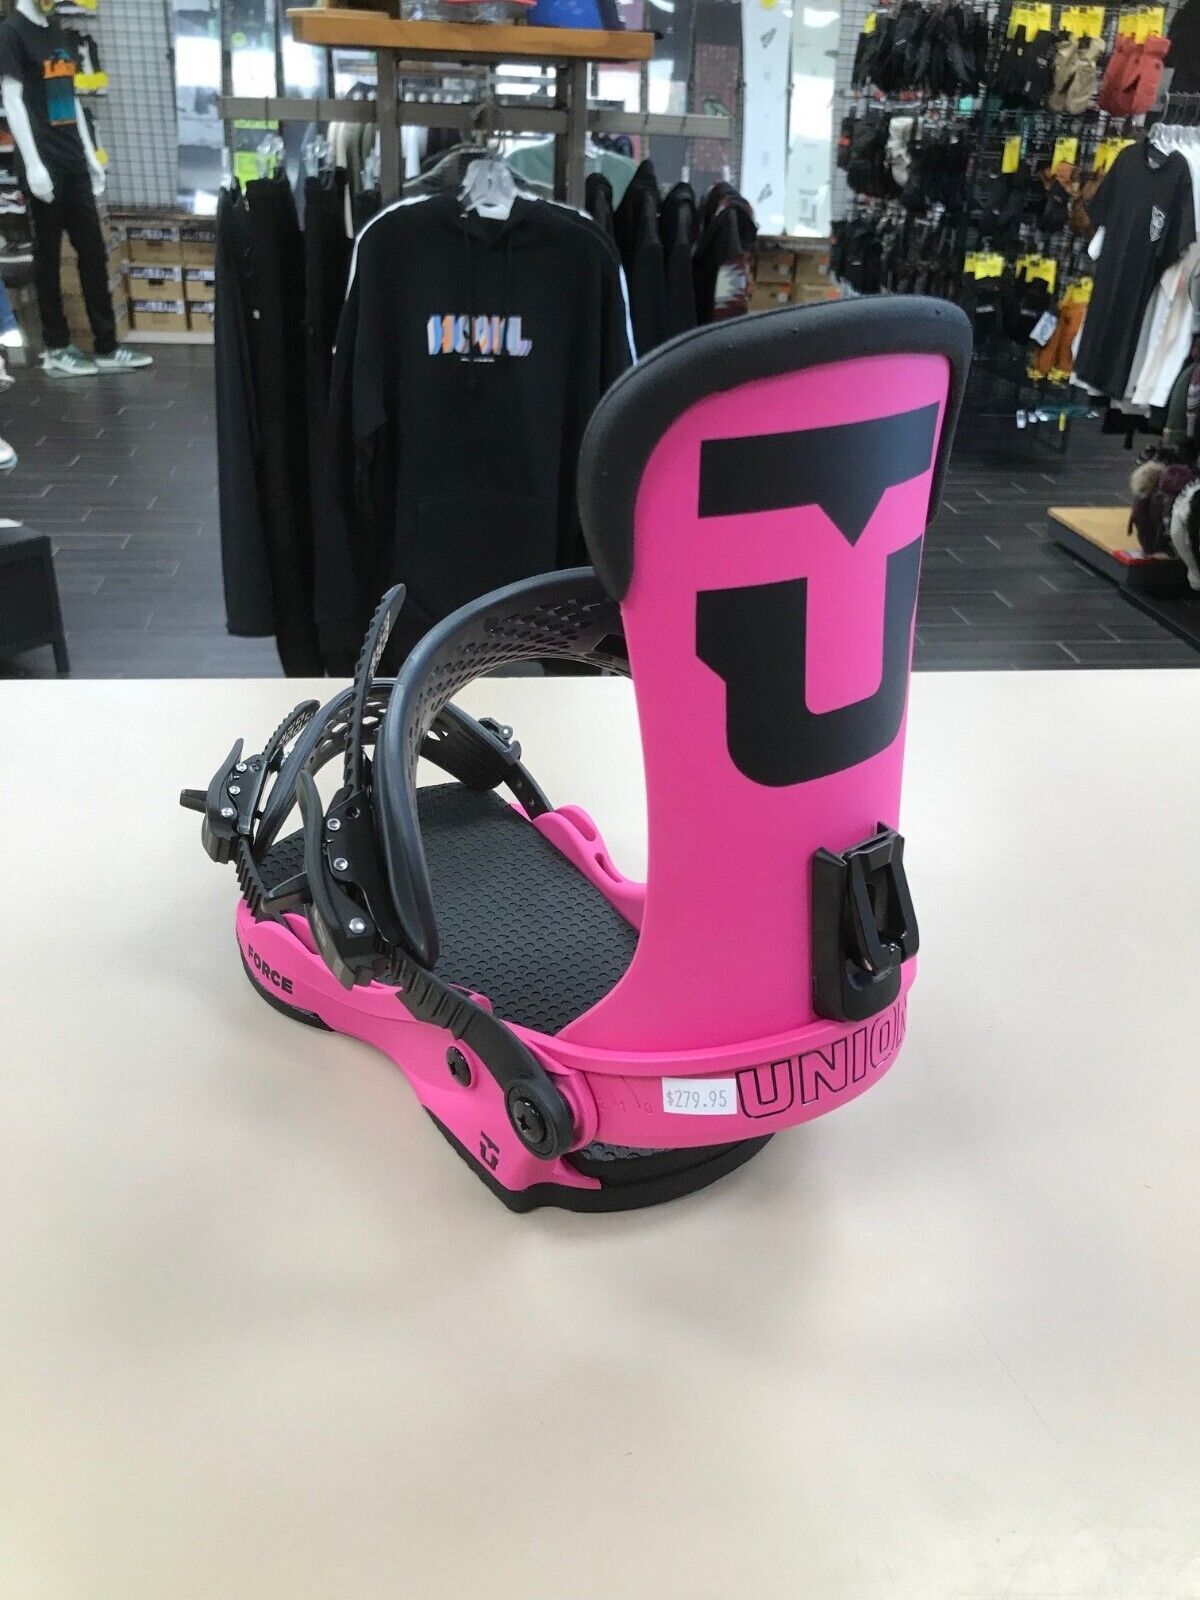 UNION FORCE BINDINGS MEN'S SIZE MEDIUM (HOT PINK/TEAM HB) *NEW IN BOX*